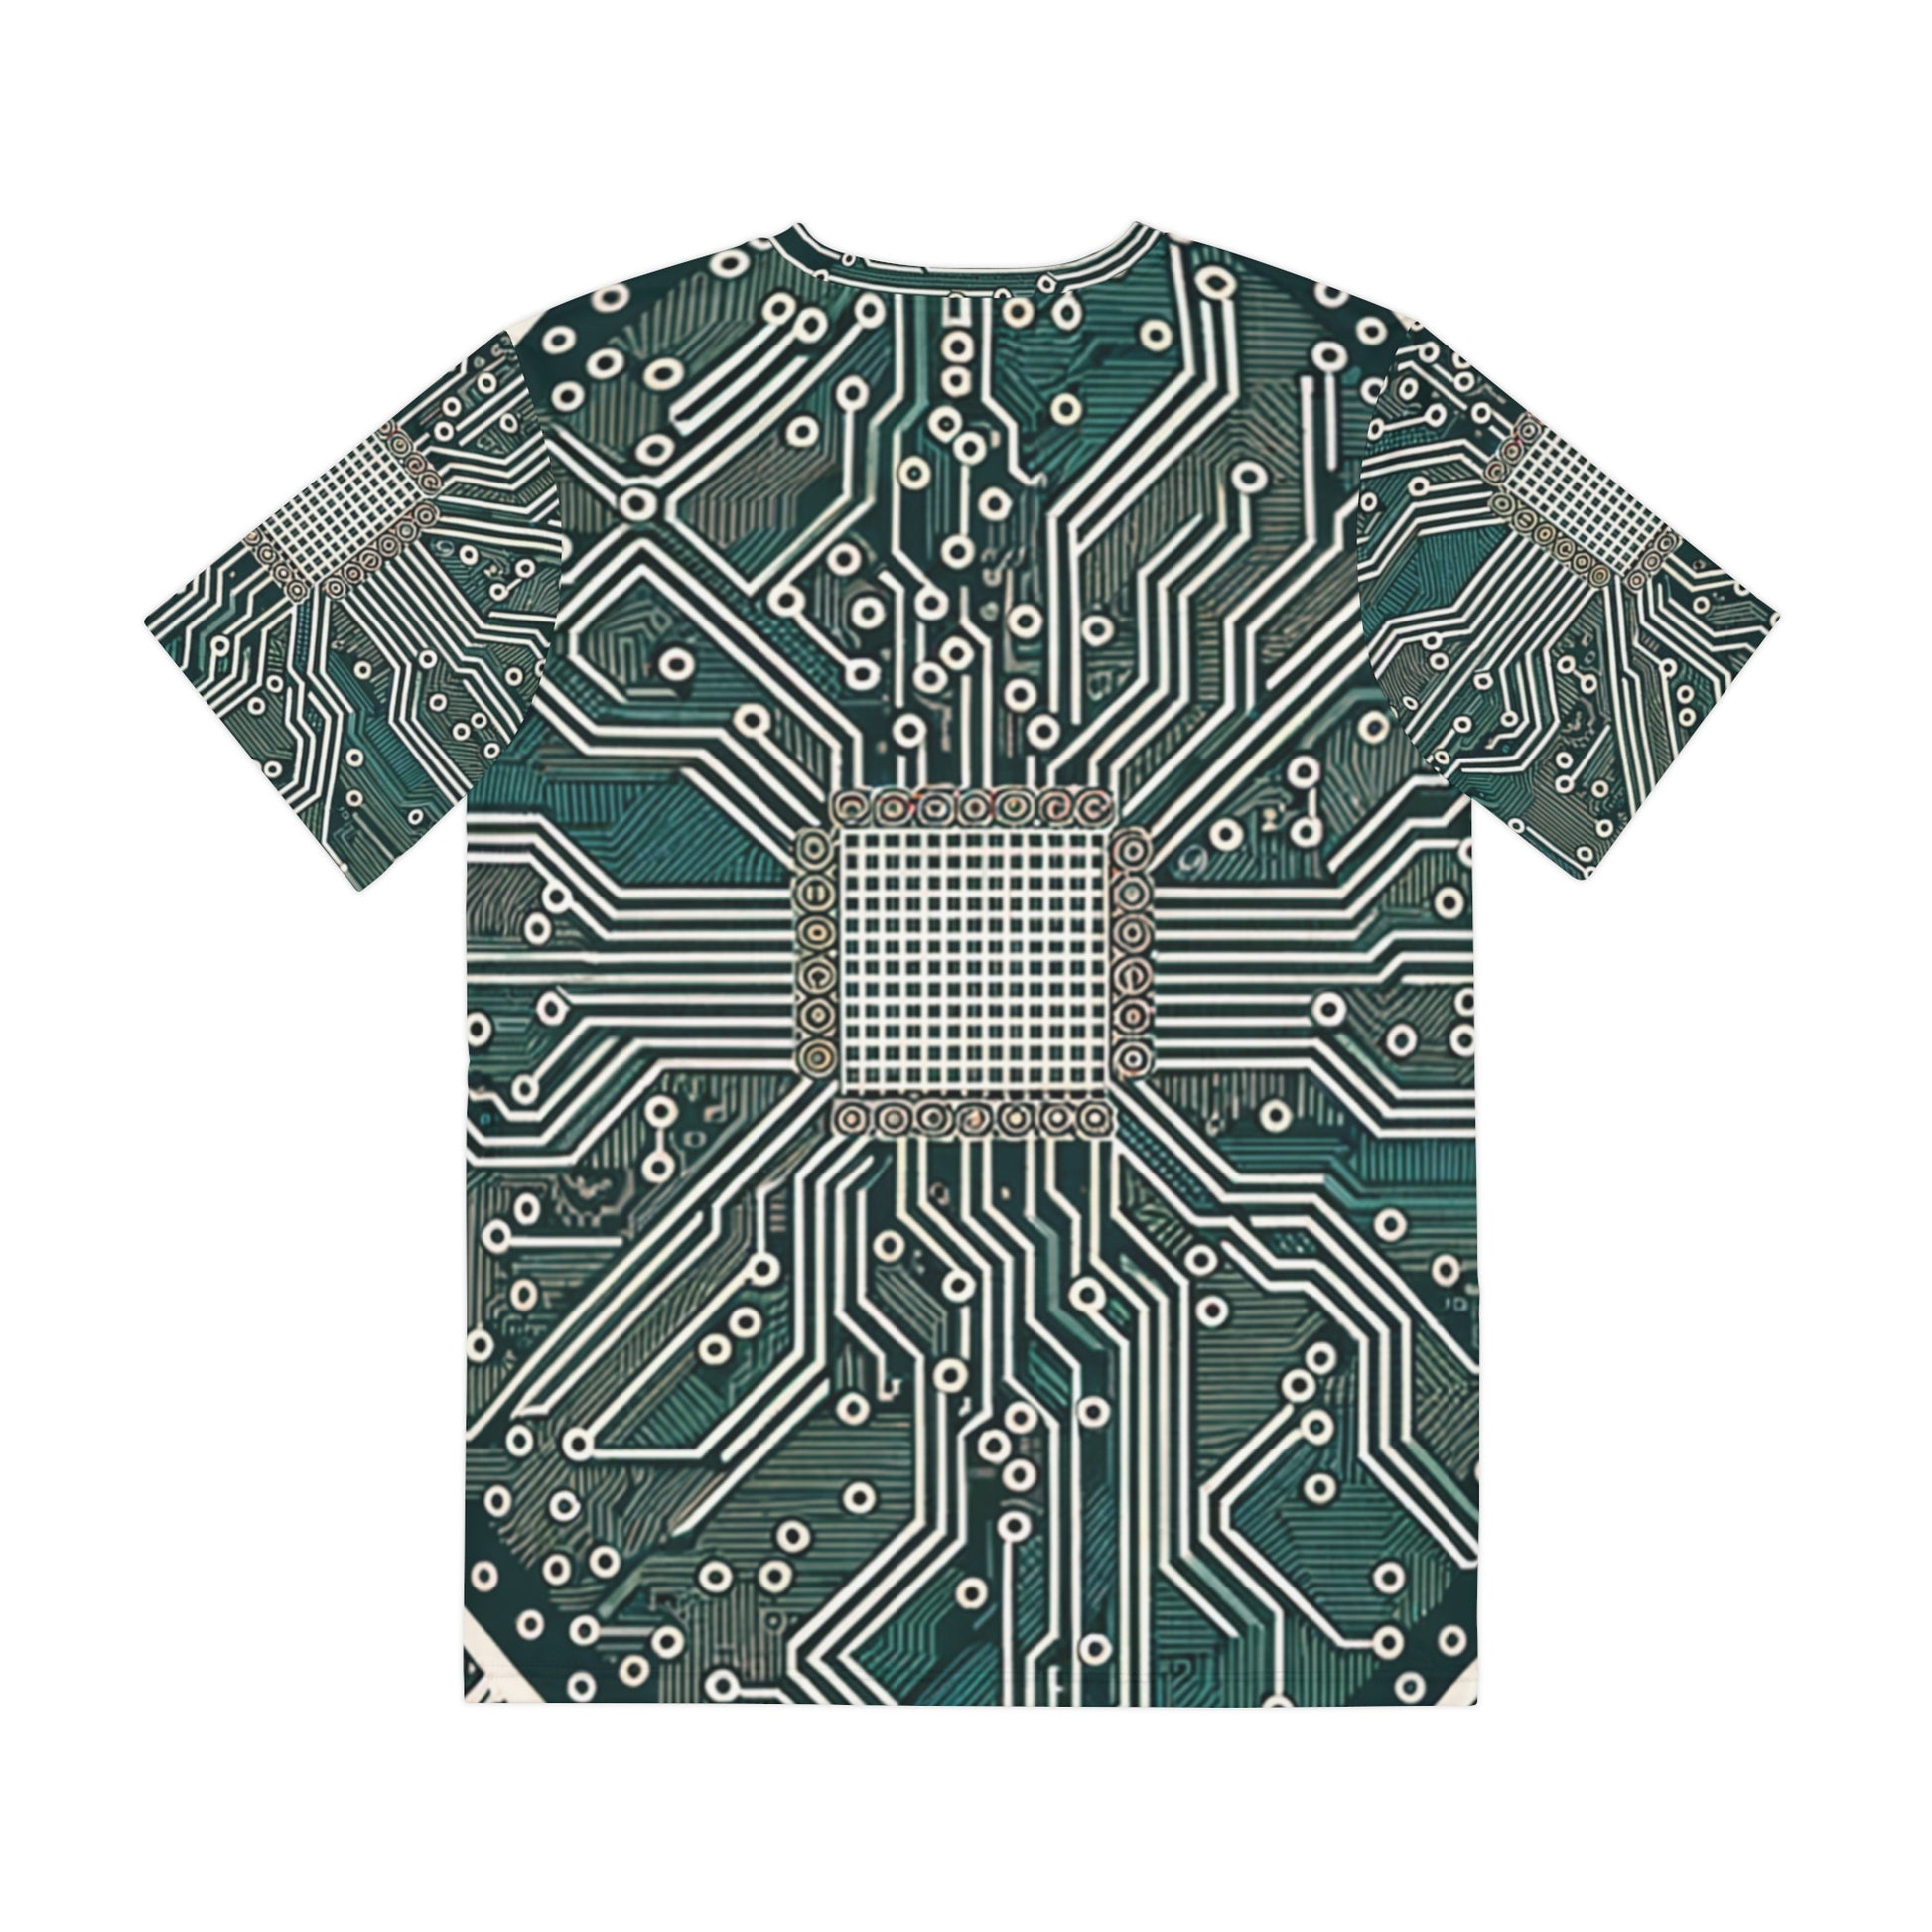 Back view of the Circuit Symmetry Matrix Crewneck Pullover All-Over Print Short-Sleeved Shirt green gray black beige circuit pattern